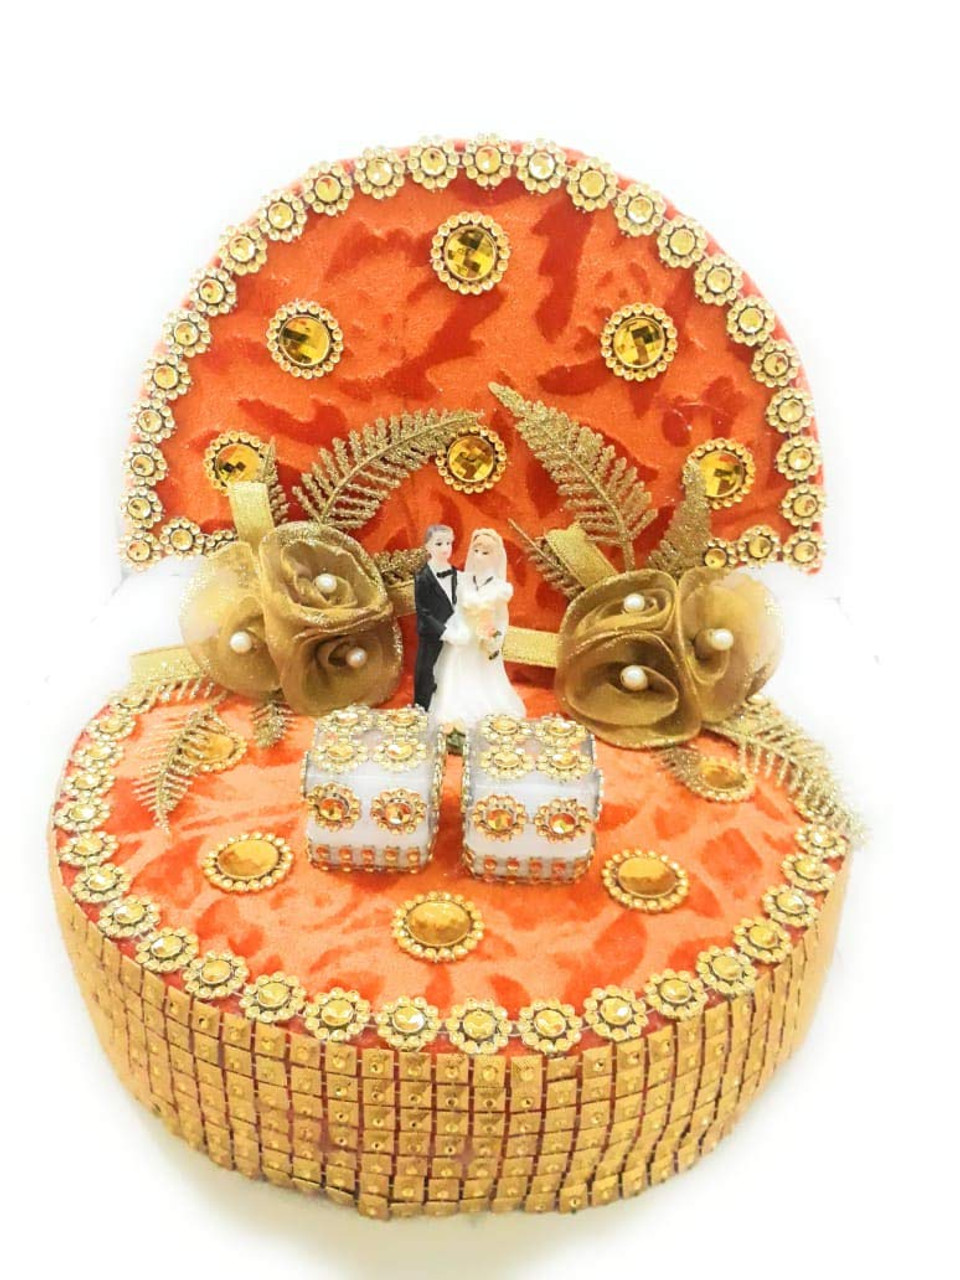 Engagement Ring Platter Online In India